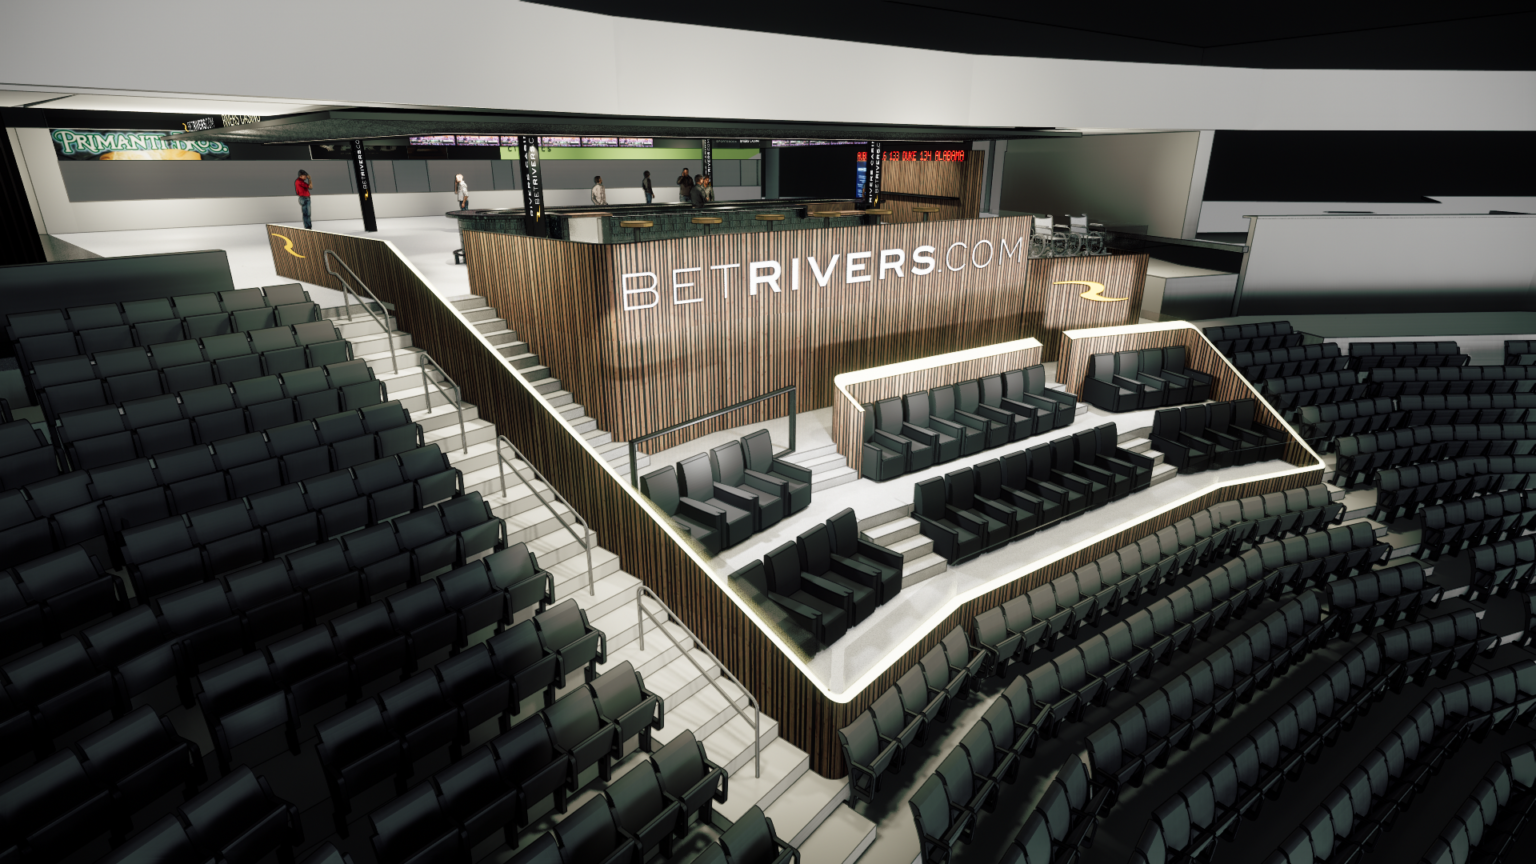 rivers casino pittsburgh event center seating chart